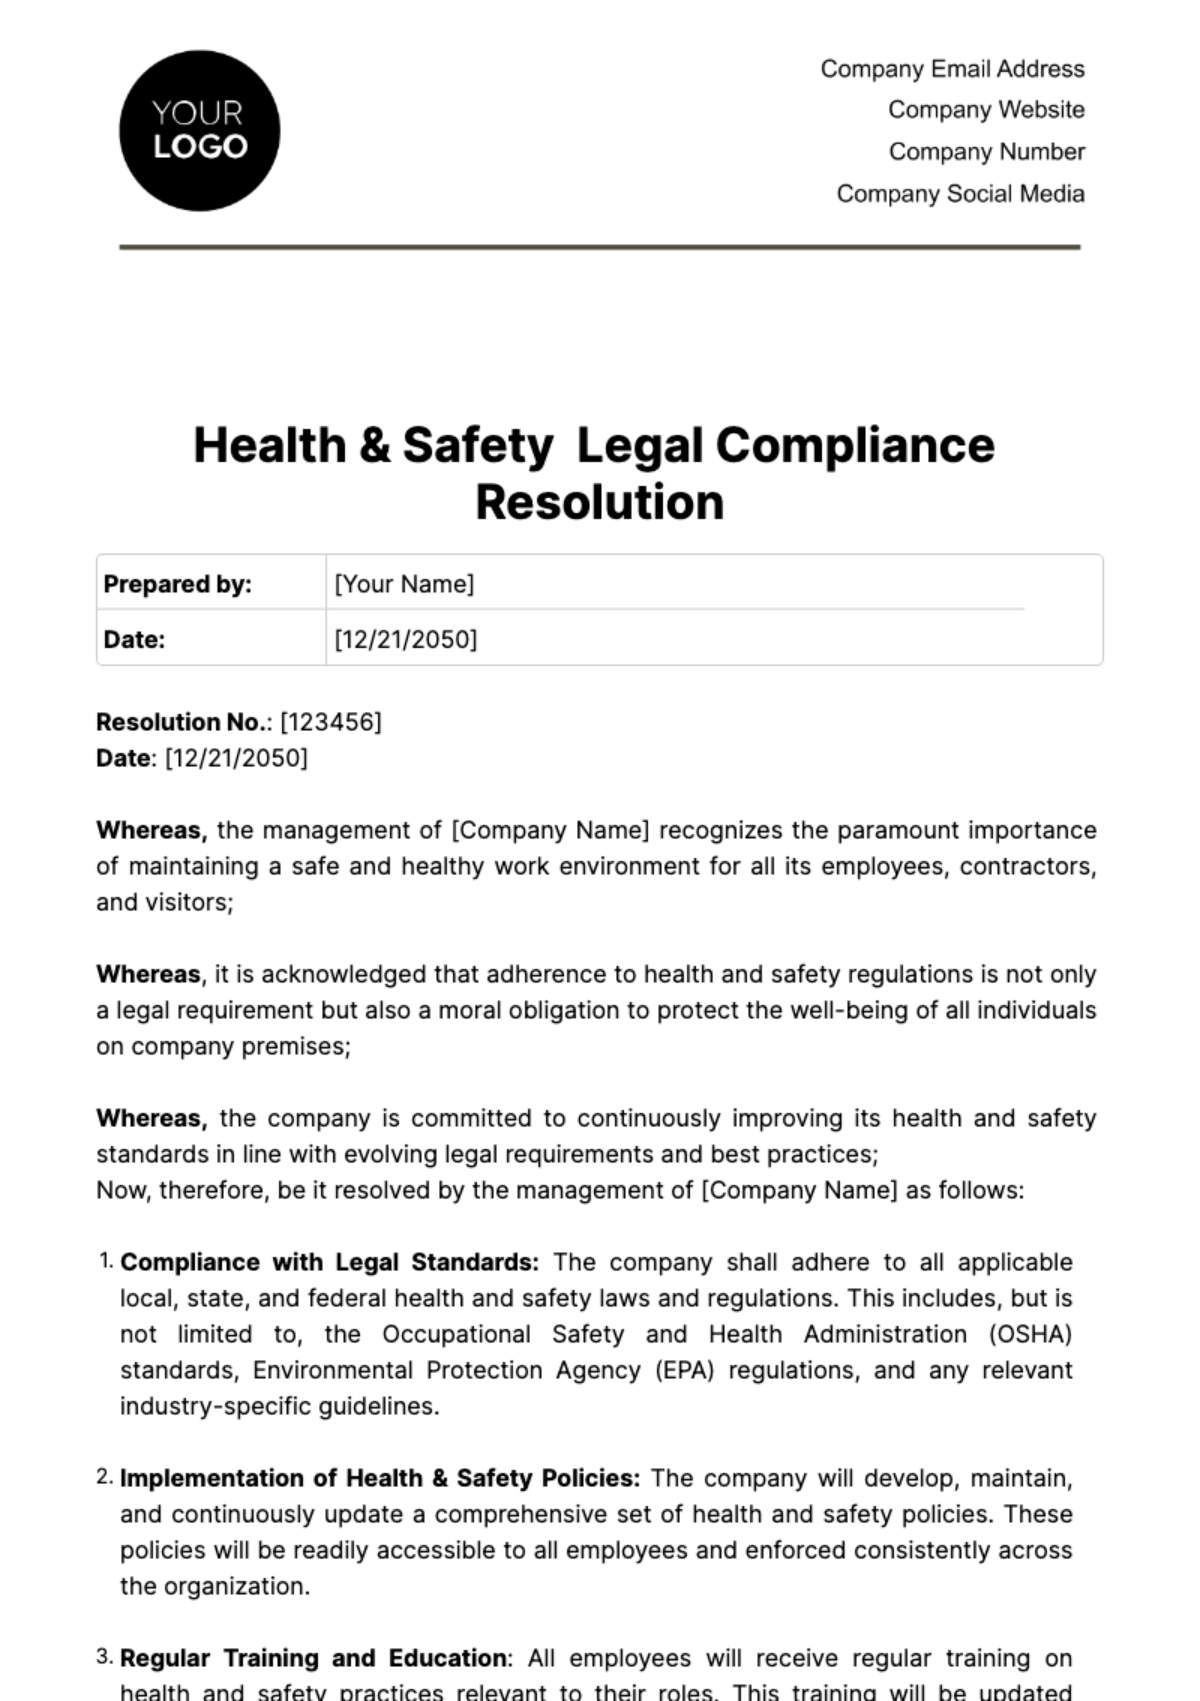 Free Health & Safety  Legal Compliance Resolution Template